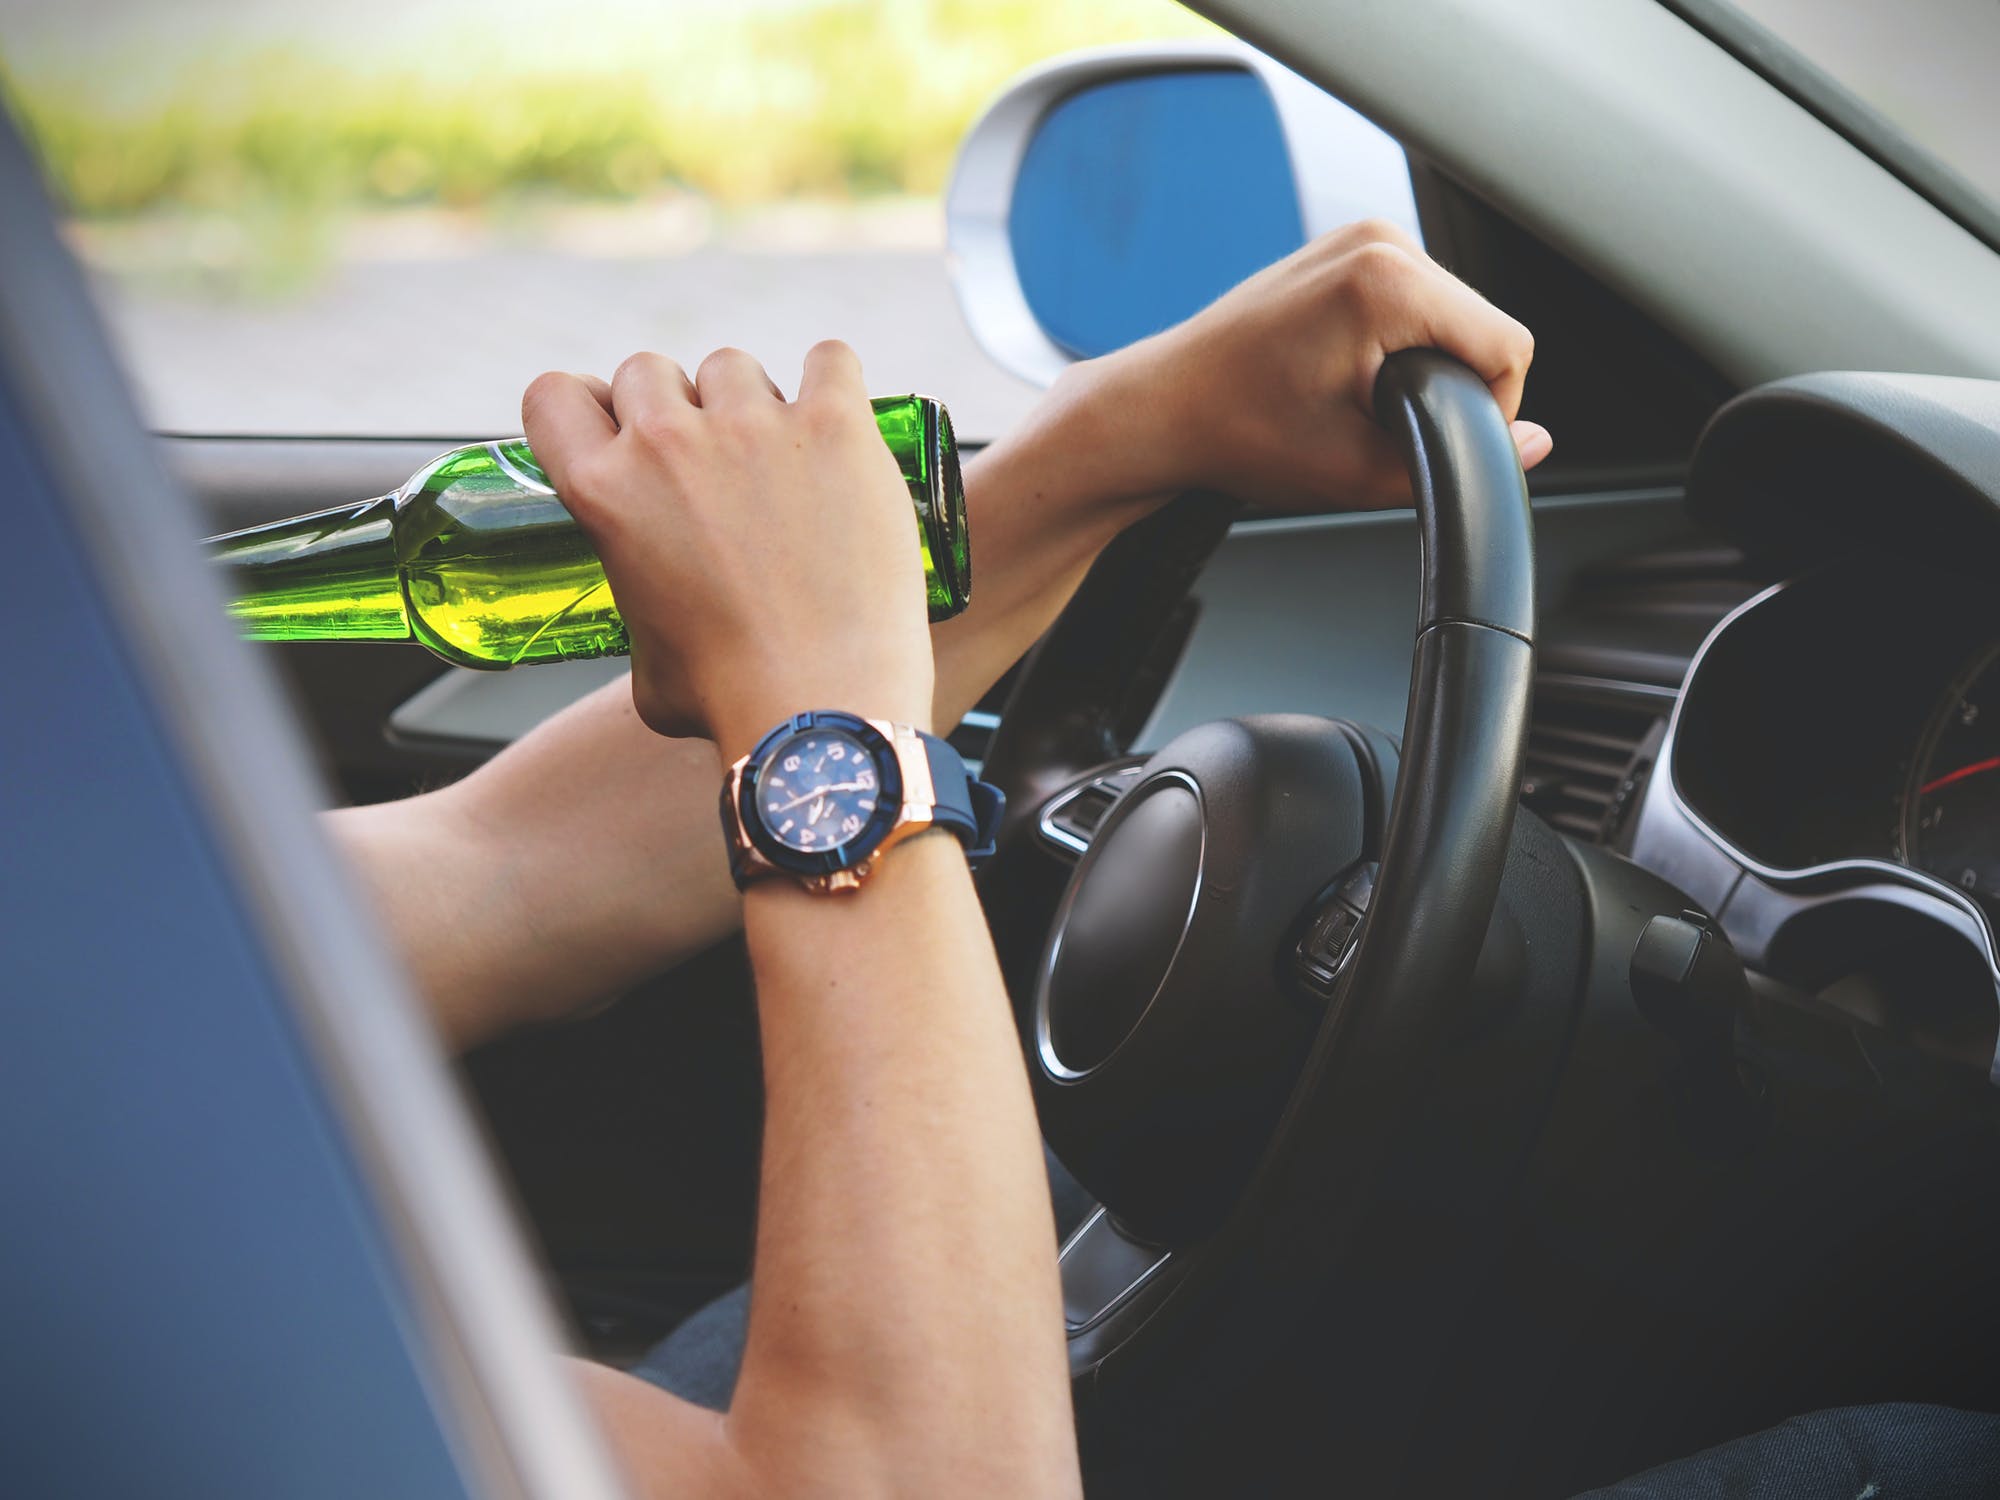 How Does Alcohol Affect Driving?